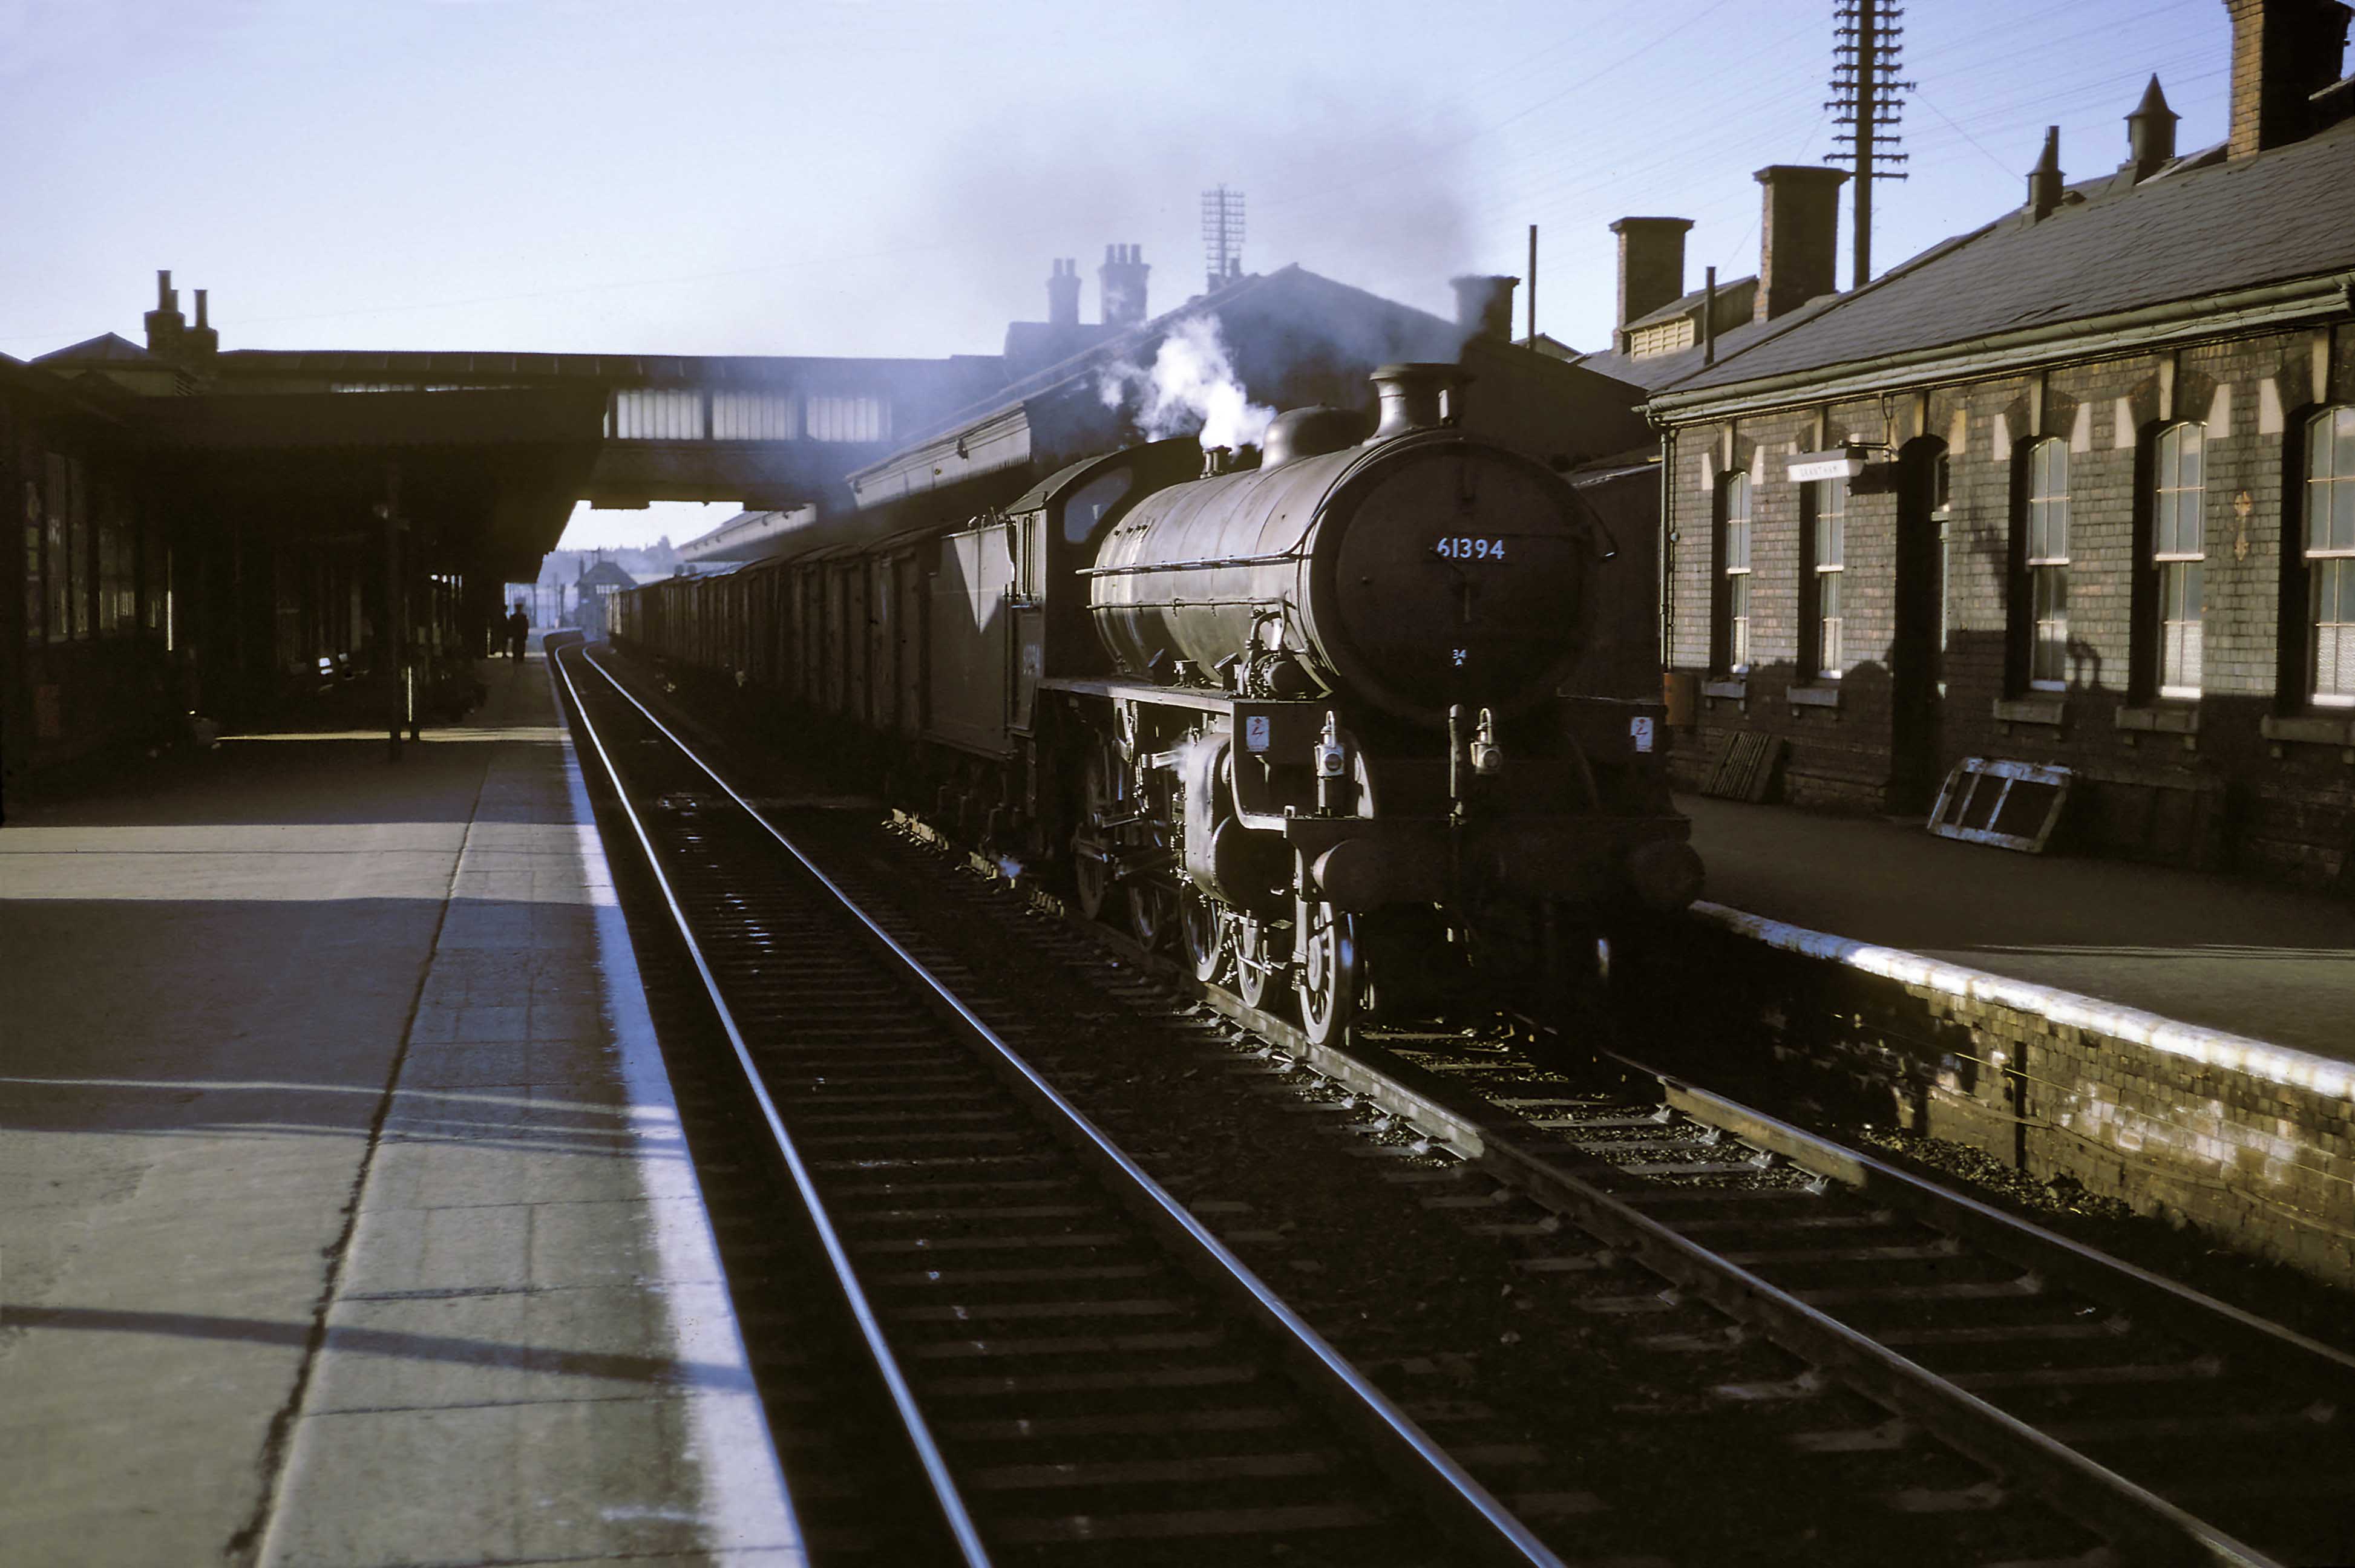 Class B1 No. 61394 of King’s Cross (34A) shed begins the climb to Stoke Summit with a fish train for London on 31st August 1961. The light haze from the chimney shows that the fireman has everything well in hand for a good run up to Stoke summit, and surely the catch will be at Billingsgate Market on time next morning. This is likely to be the afternoon fish train from Hull to King's Cross Goods Depot. It left Hull around 3.40pm, regularly hauled by this locomotive or its consecutively numbered sister No. 61393. Photograph by Cedric A. Clayson, © John Clayson